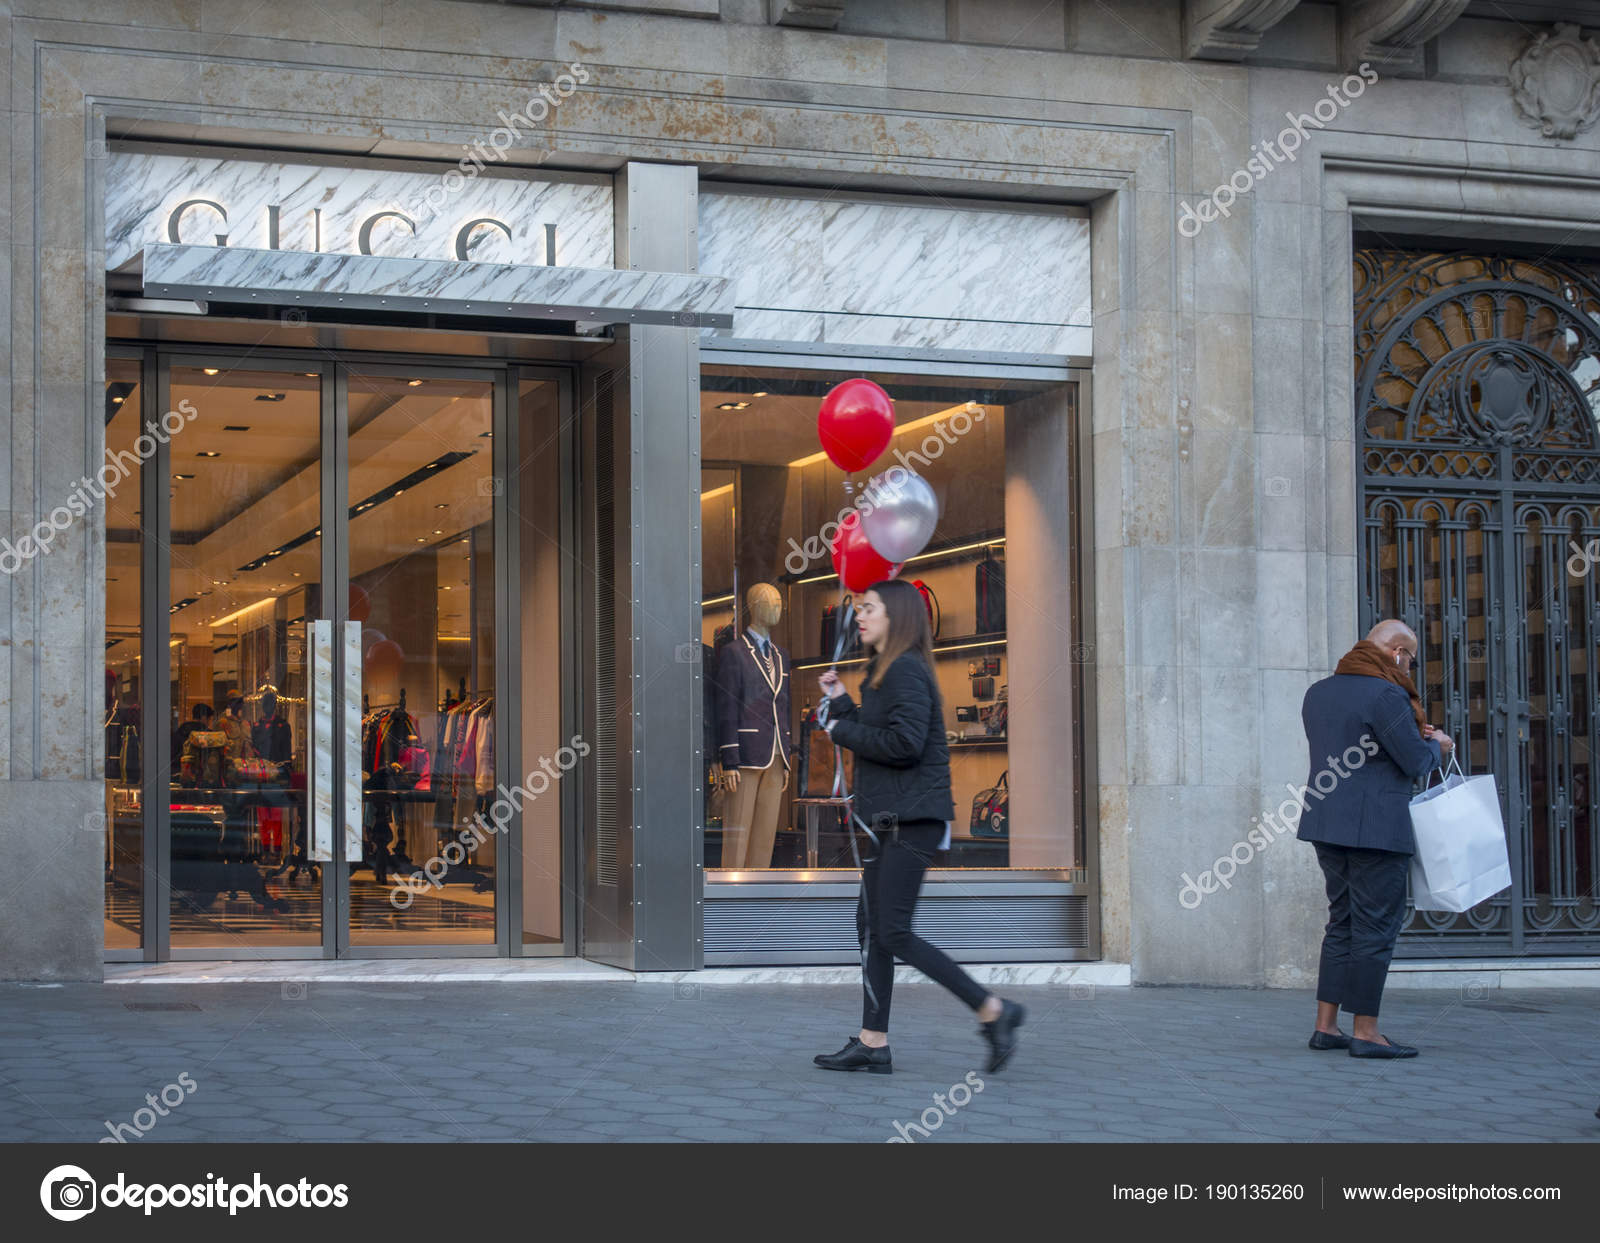 Spain. March 2018: People walking in front of Gucci shop – Stock Editorial Photo © #190135260